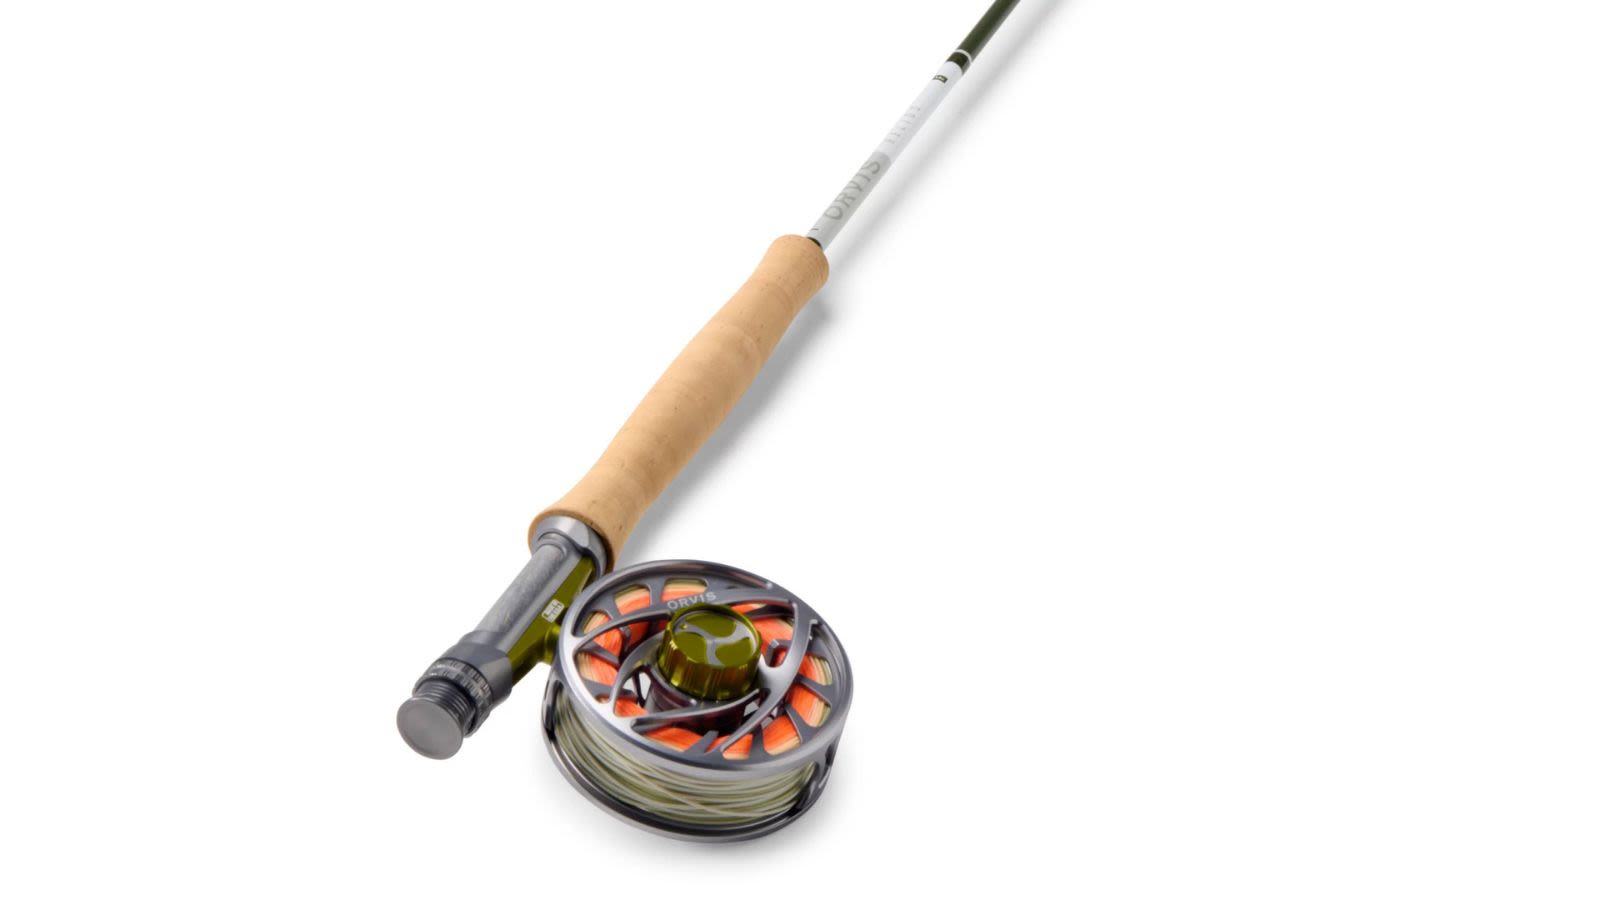 Get reel about fishing with Orvis's new fly rods and gear